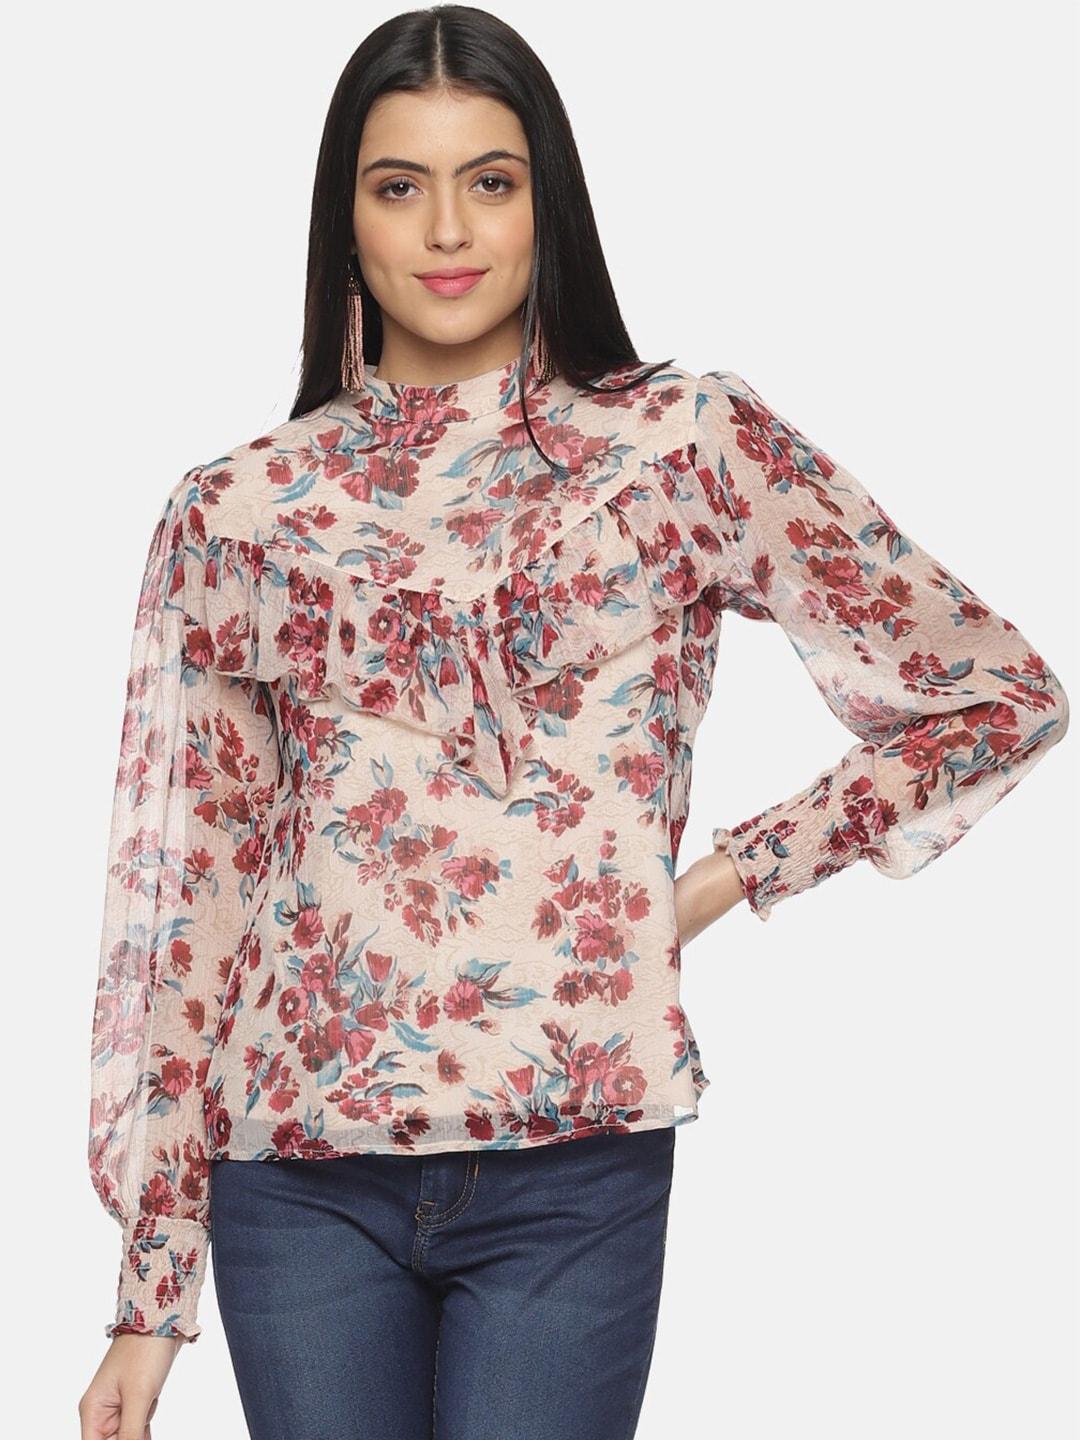 HERE&NOW White & Red Floral Printed Ruffles Chiffon Top